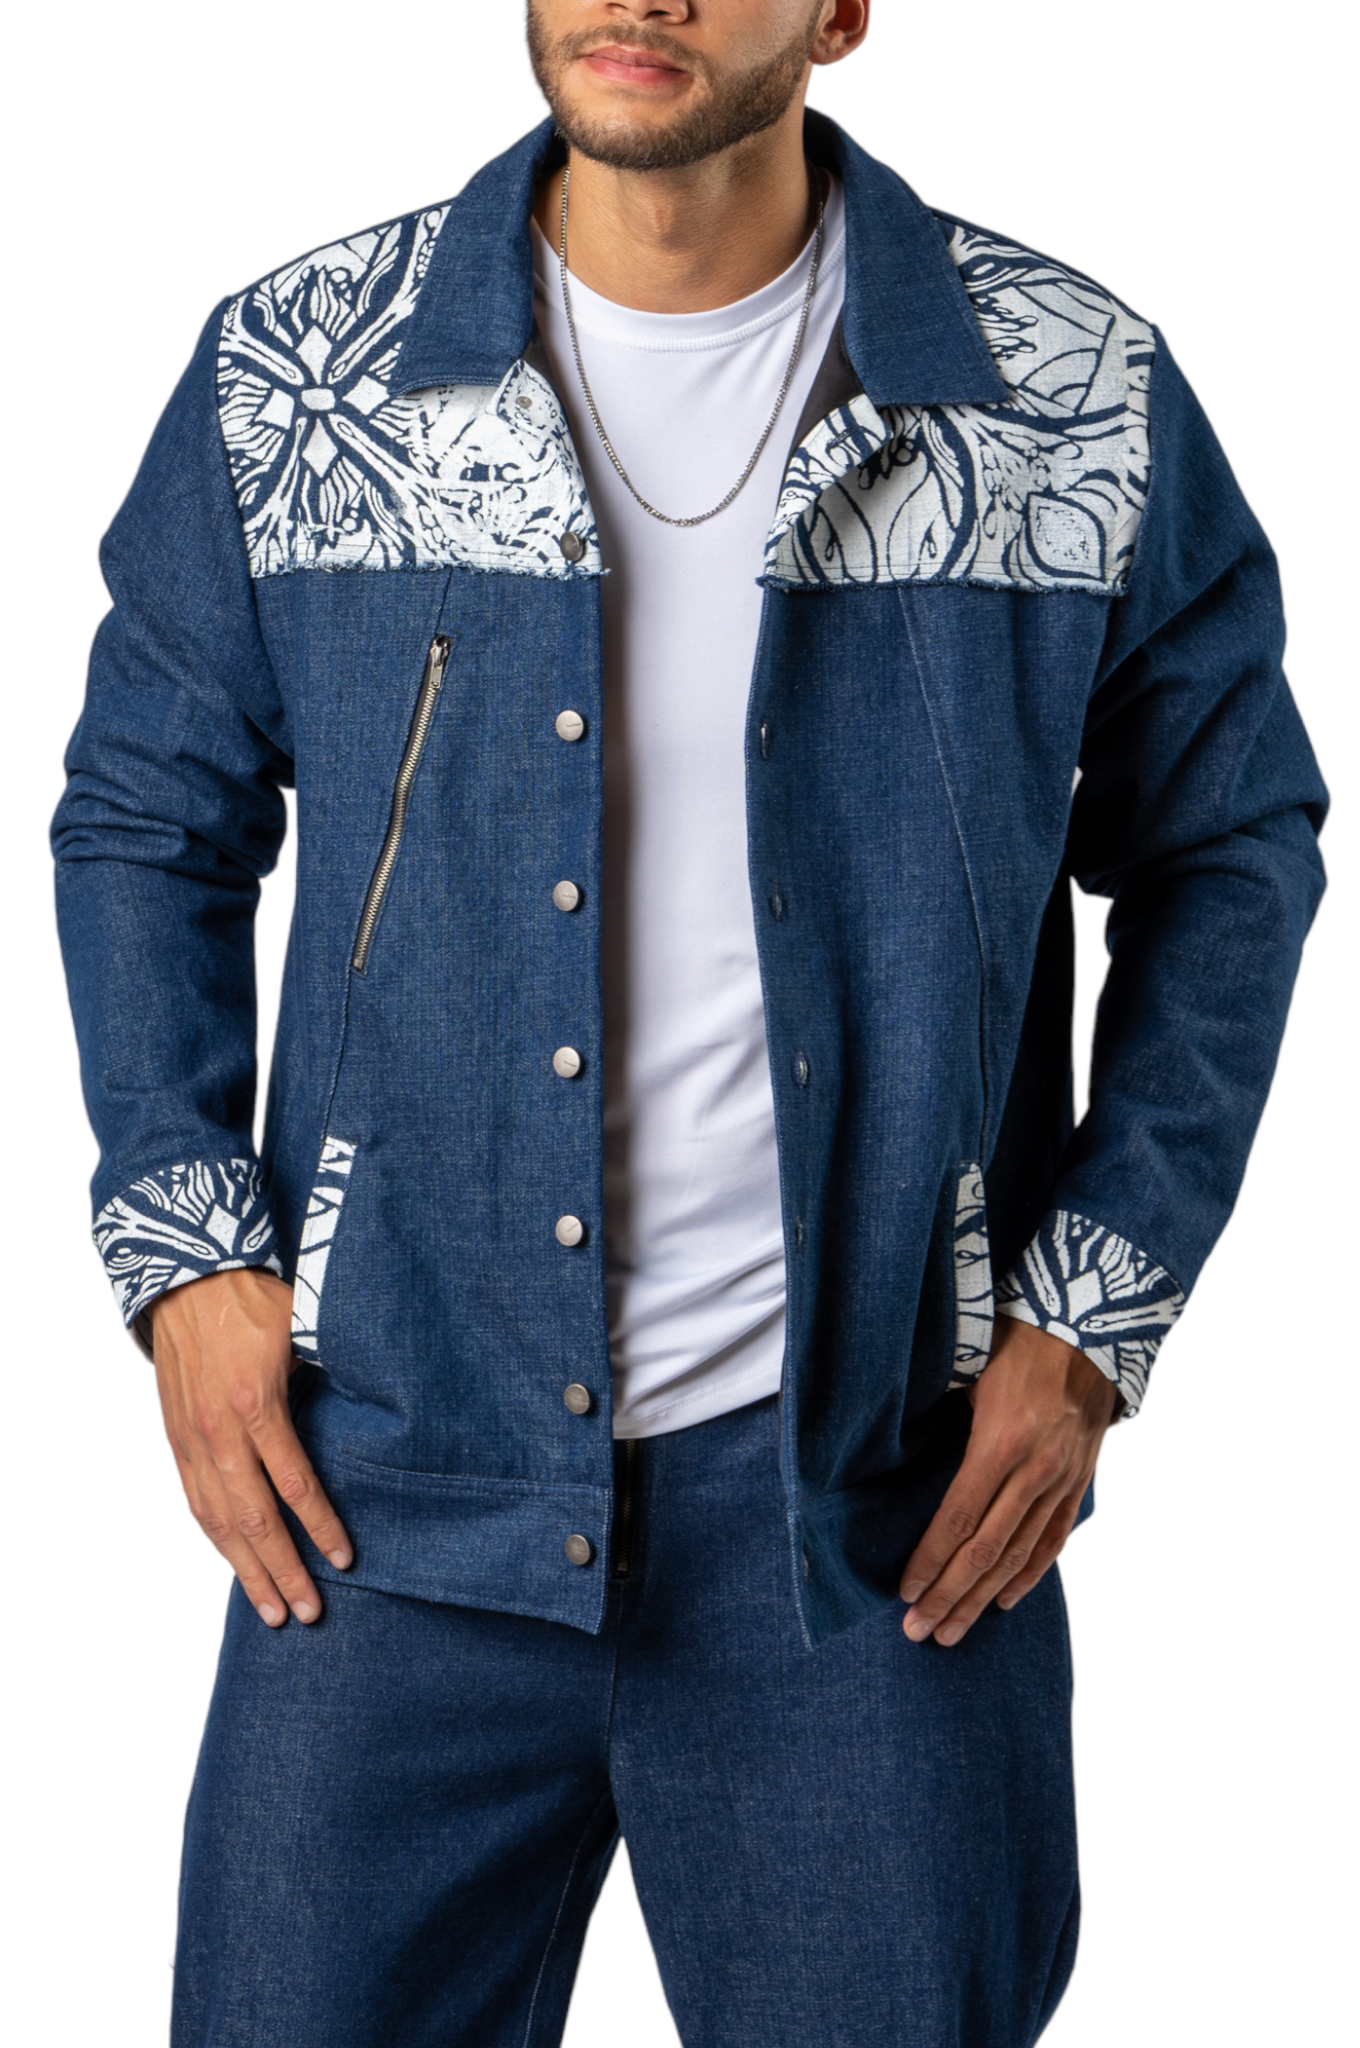 The Cultivate Denim Jacket - Ragtribe Ethical Clothing & Productions, LLC